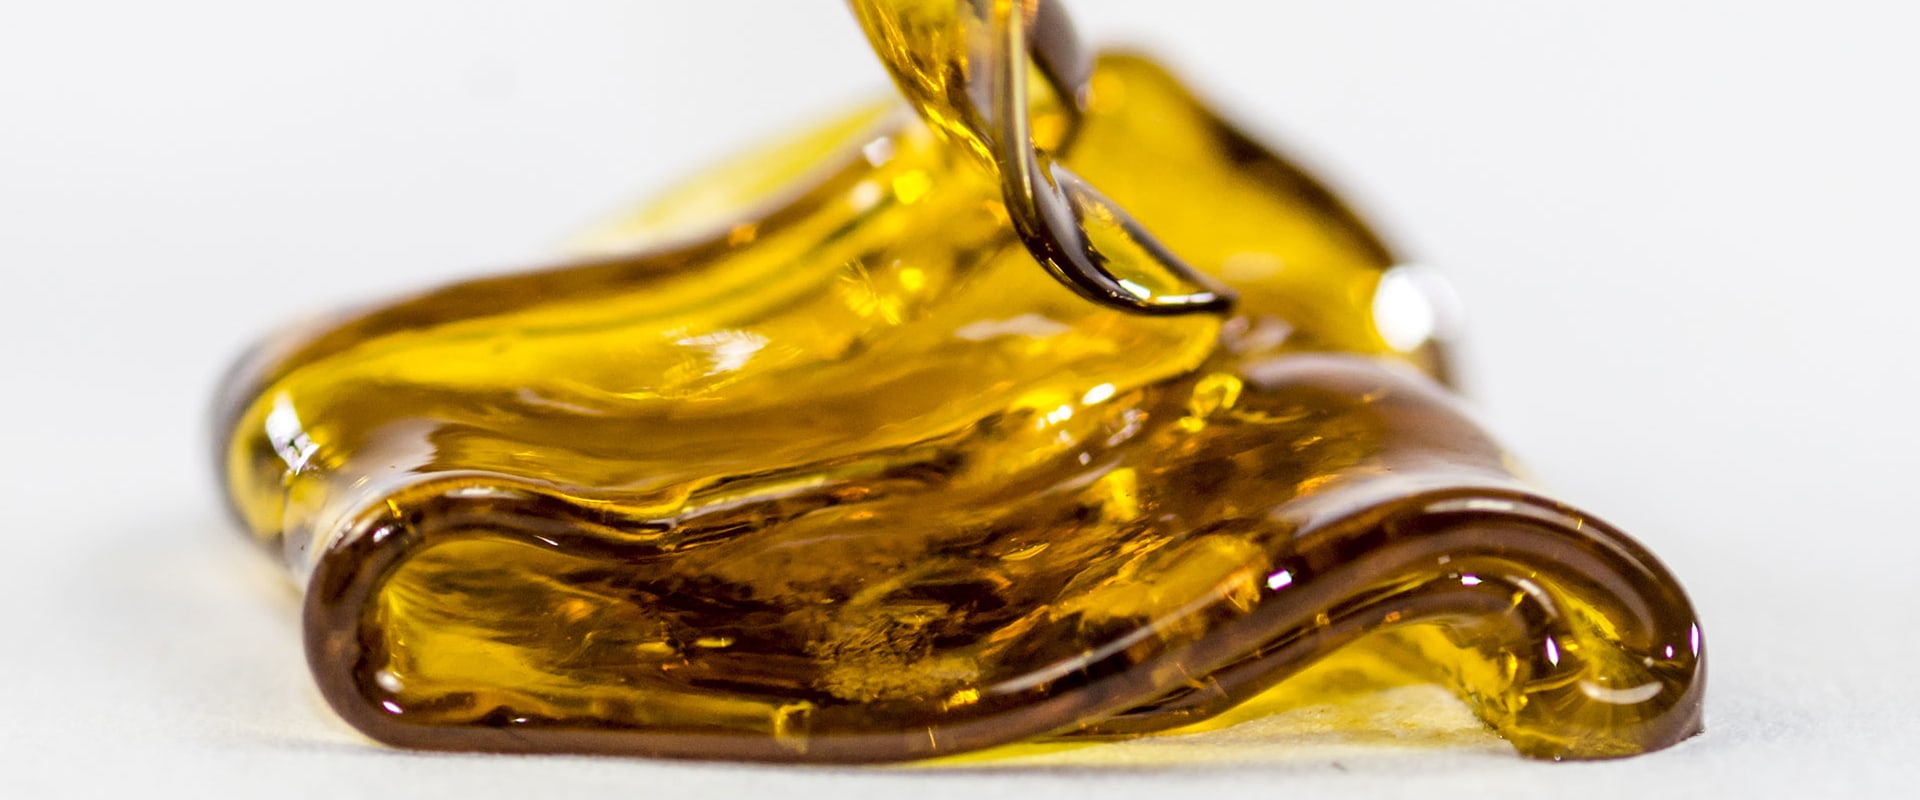 What is a cannabis extract?